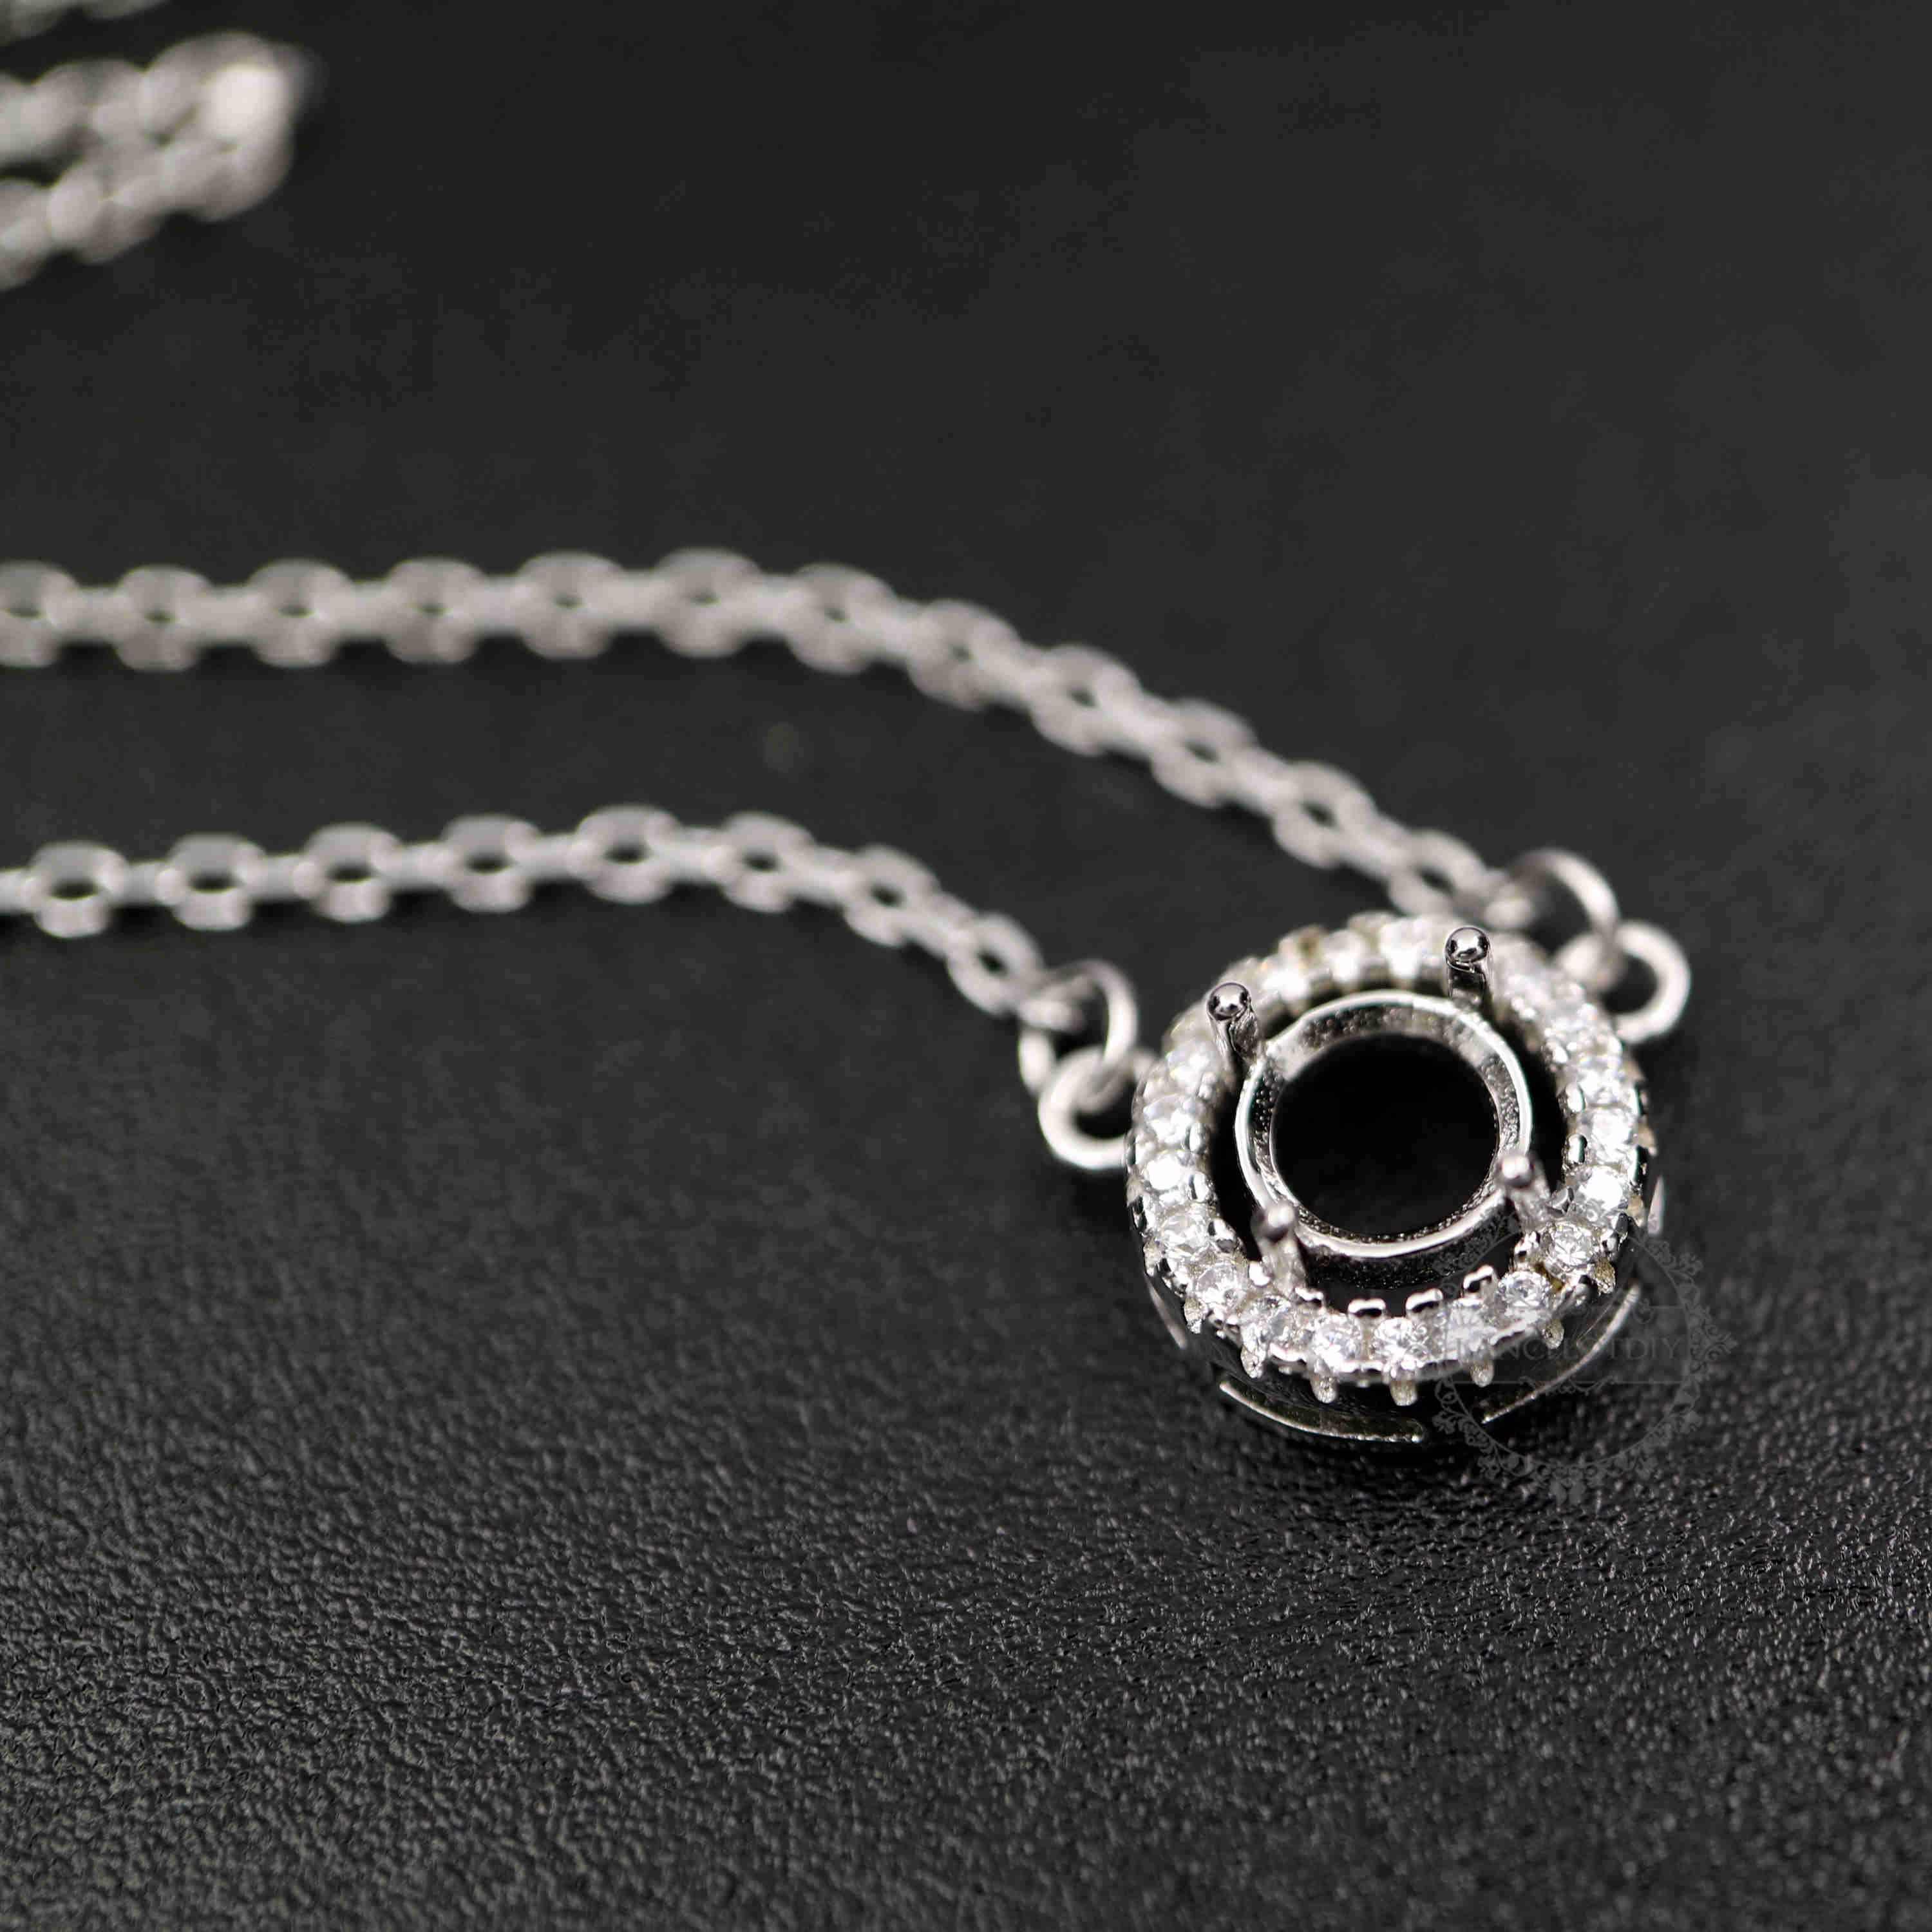 1Pcs 5-8MM Gems Cz Stone Round Prong Bezel Settings Solid 925 Sterling Silver DIY Pendant Charm Tray With 15'' Necklace Chain 1411215 - Click Image to Close